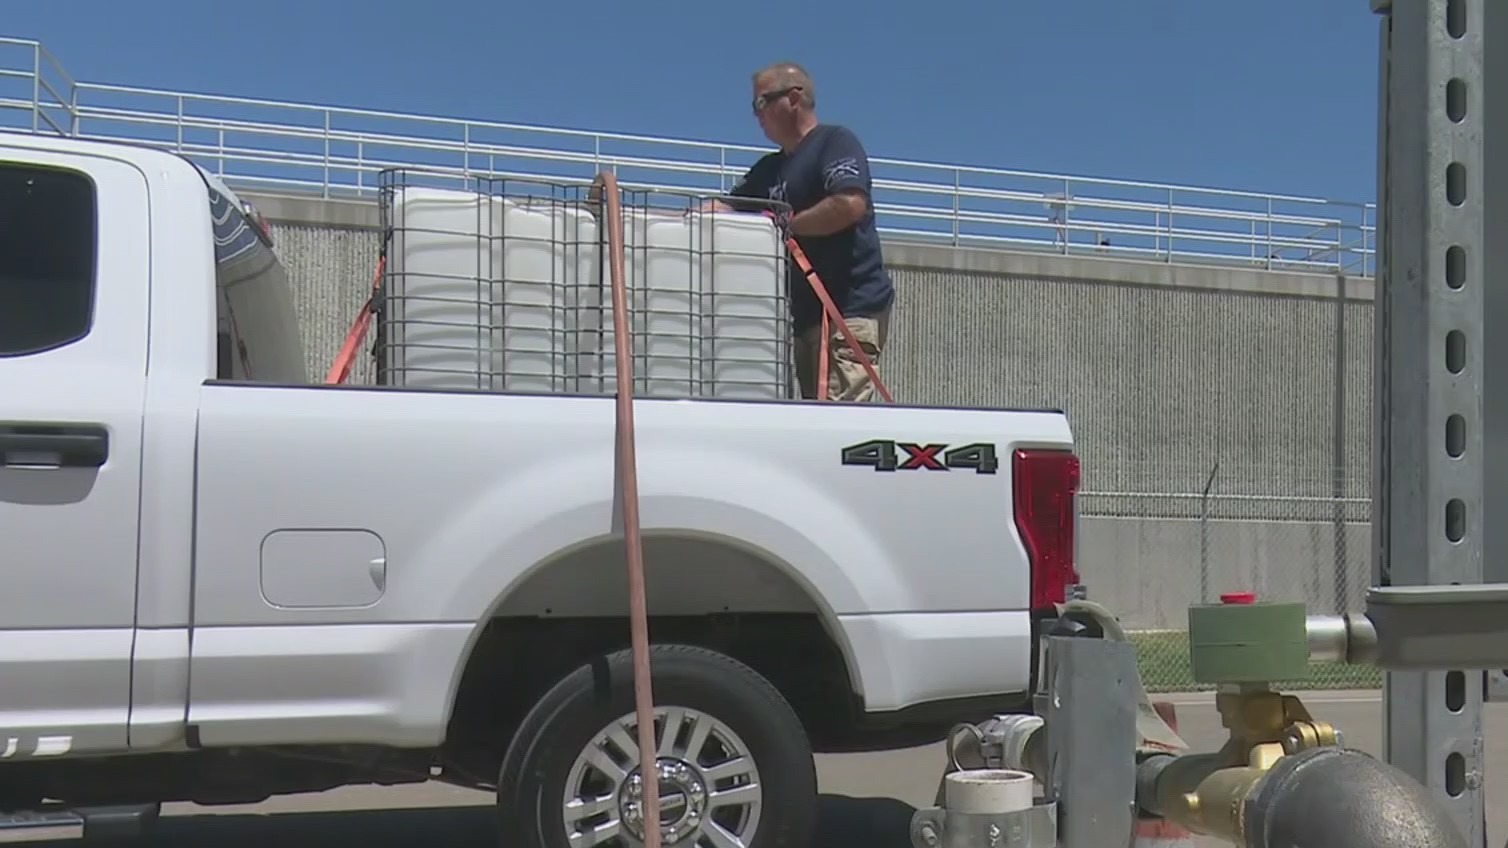 A Brentwood resident fills a water tank placed in the back of his pickup with recycled water. (CBS)